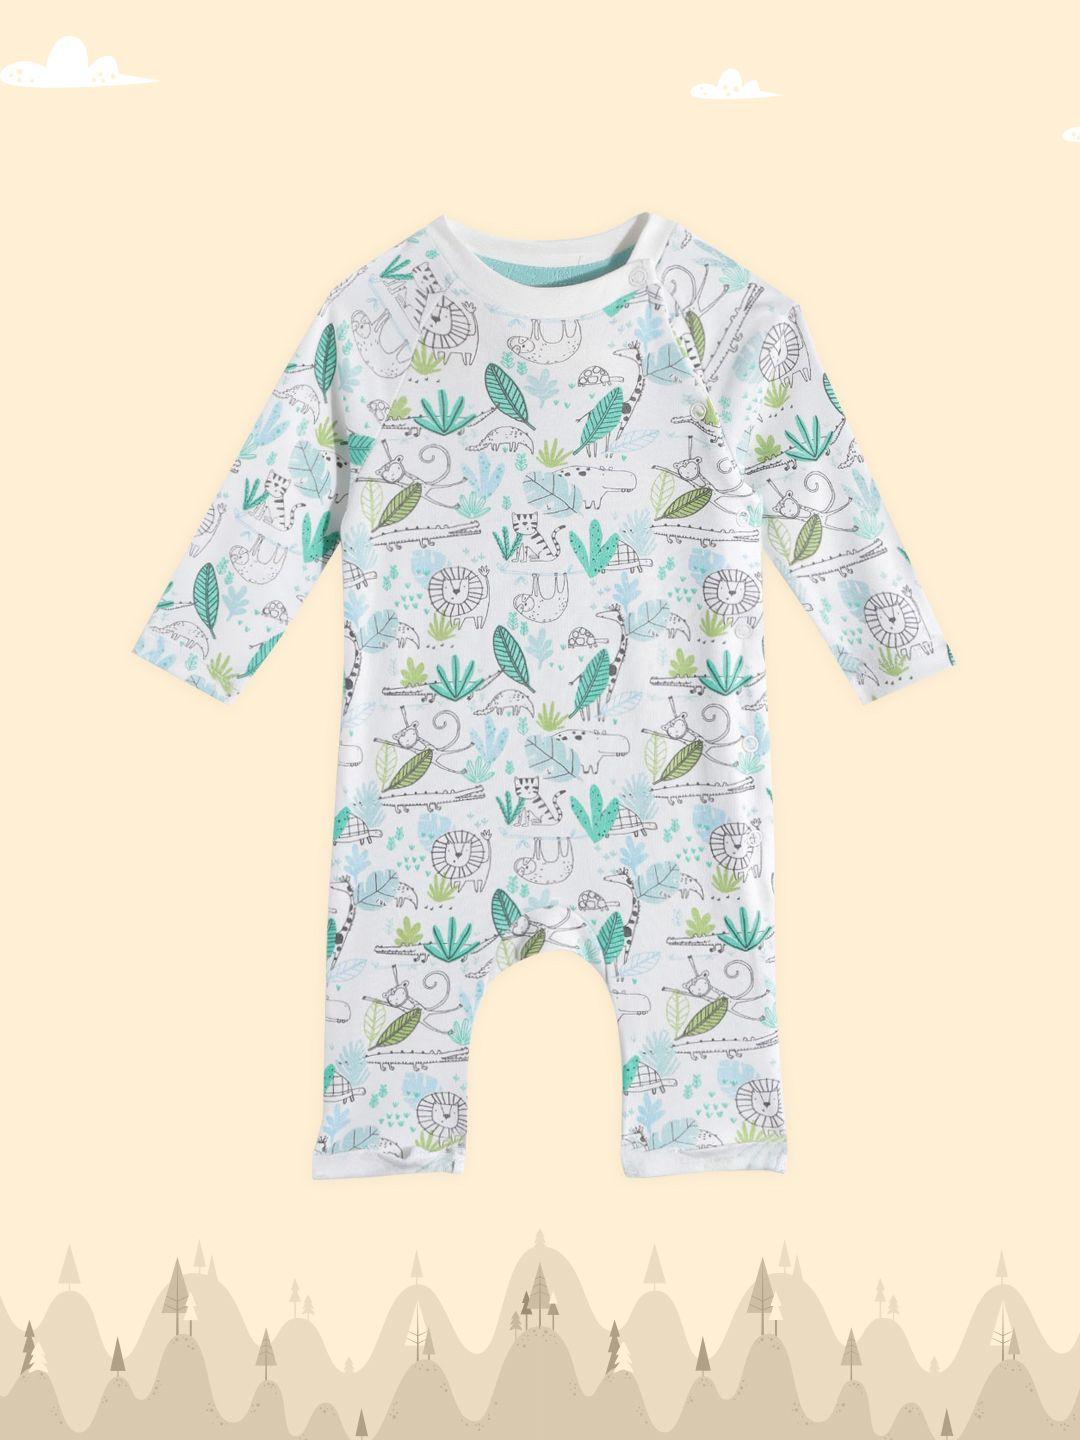 h by hamleys infant boys white & green pure cotton printed rompers